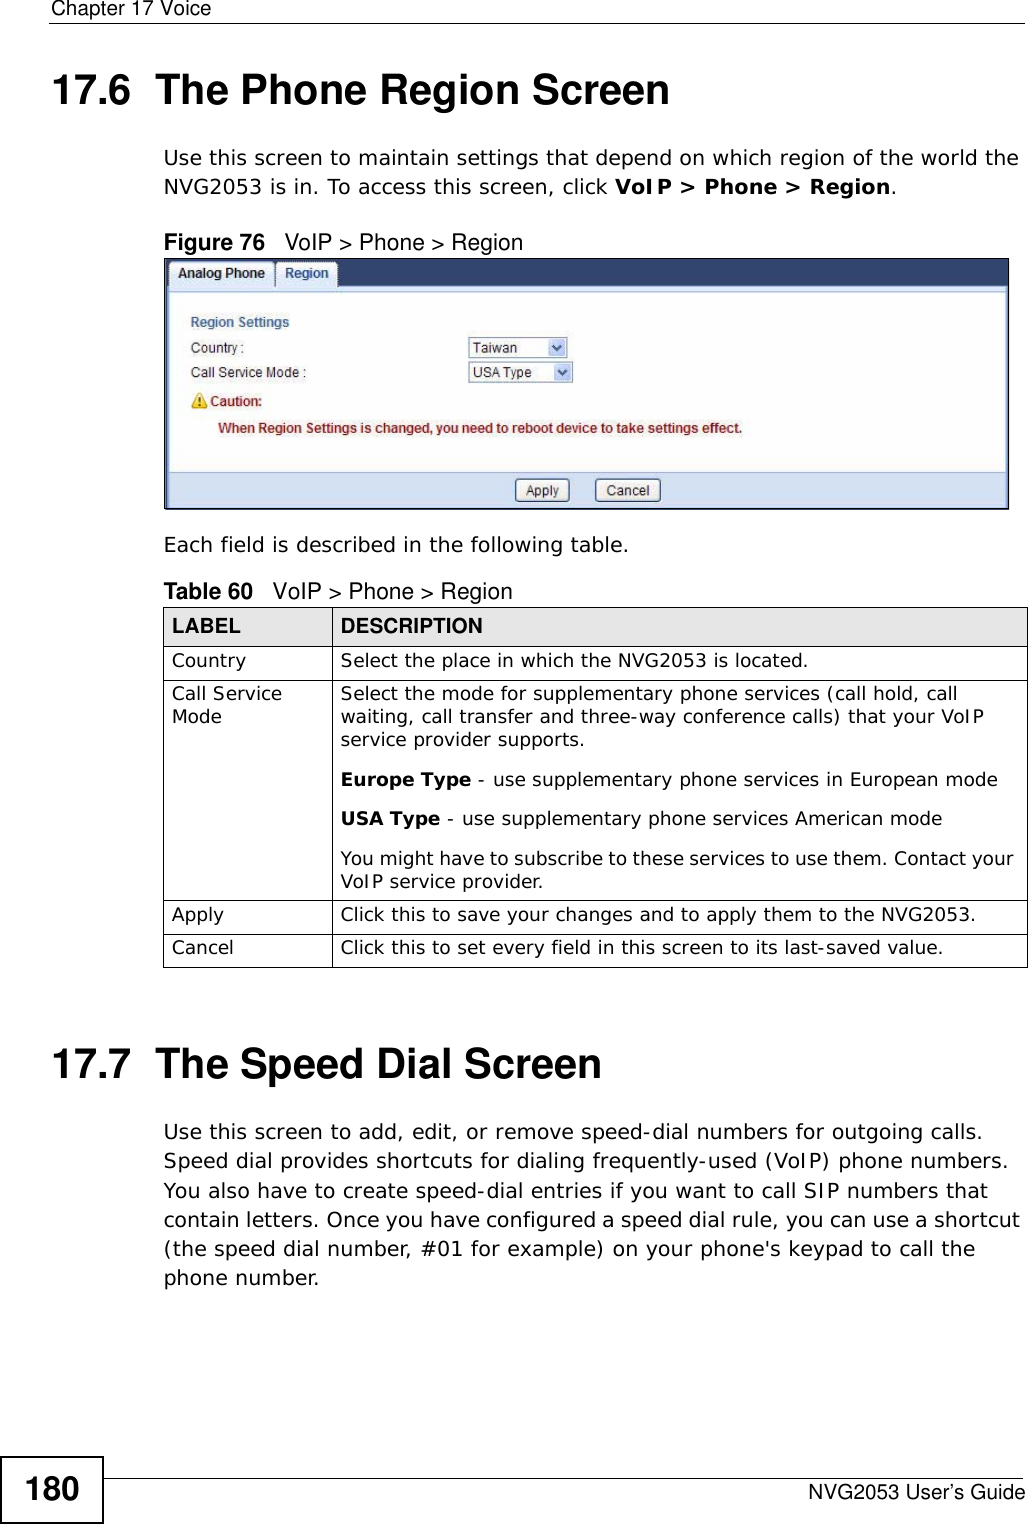 Chapter 17 VoiceNVG2053 User’s Guide18017.6  The Phone Region Screen Use this screen to maintain settings that depend on which region of the world the NVG2053 is in. To access this screen, click VoIP &gt; Phone &gt; Region.Figure 76   VoIP &gt; Phone &gt; RegionEach field is described in the following table.17.7  The Speed Dial ScreenUse this screen to add, edit, or remove speed-dial numbers for outgoing calls. Speed dial provides shortcuts for dialing frequently-used (VoIP) phone numbers. You also have to create speed-dial entries if you want to call SIP numbers that contain letters. Once you have configured a speed dial rule, you can use a shortcut (the speed dial number, #01 for example) on your phone&apos;s keypad to call the phone number.Table 60   VoIP &gt; Phone &gt; RegionLABEL DESCRIPTIONCountry Select the place in which the NVG2053 is located.Call Service Mode Select the mode for supplementary phone services (call hold, call waiting, call transfer and three-way conference calls) that your VoIP service provider supports.Europe Type - use supplementary phone services in European modeUSA Type - use supplementary phone services American modeYou might have to subscribe to these services to use them. Contact your VoIP service provider.Apply Click this to save your changes and to apply them to the NVG2053.Cancel Click this to set every field in this screen to its last-saved value.